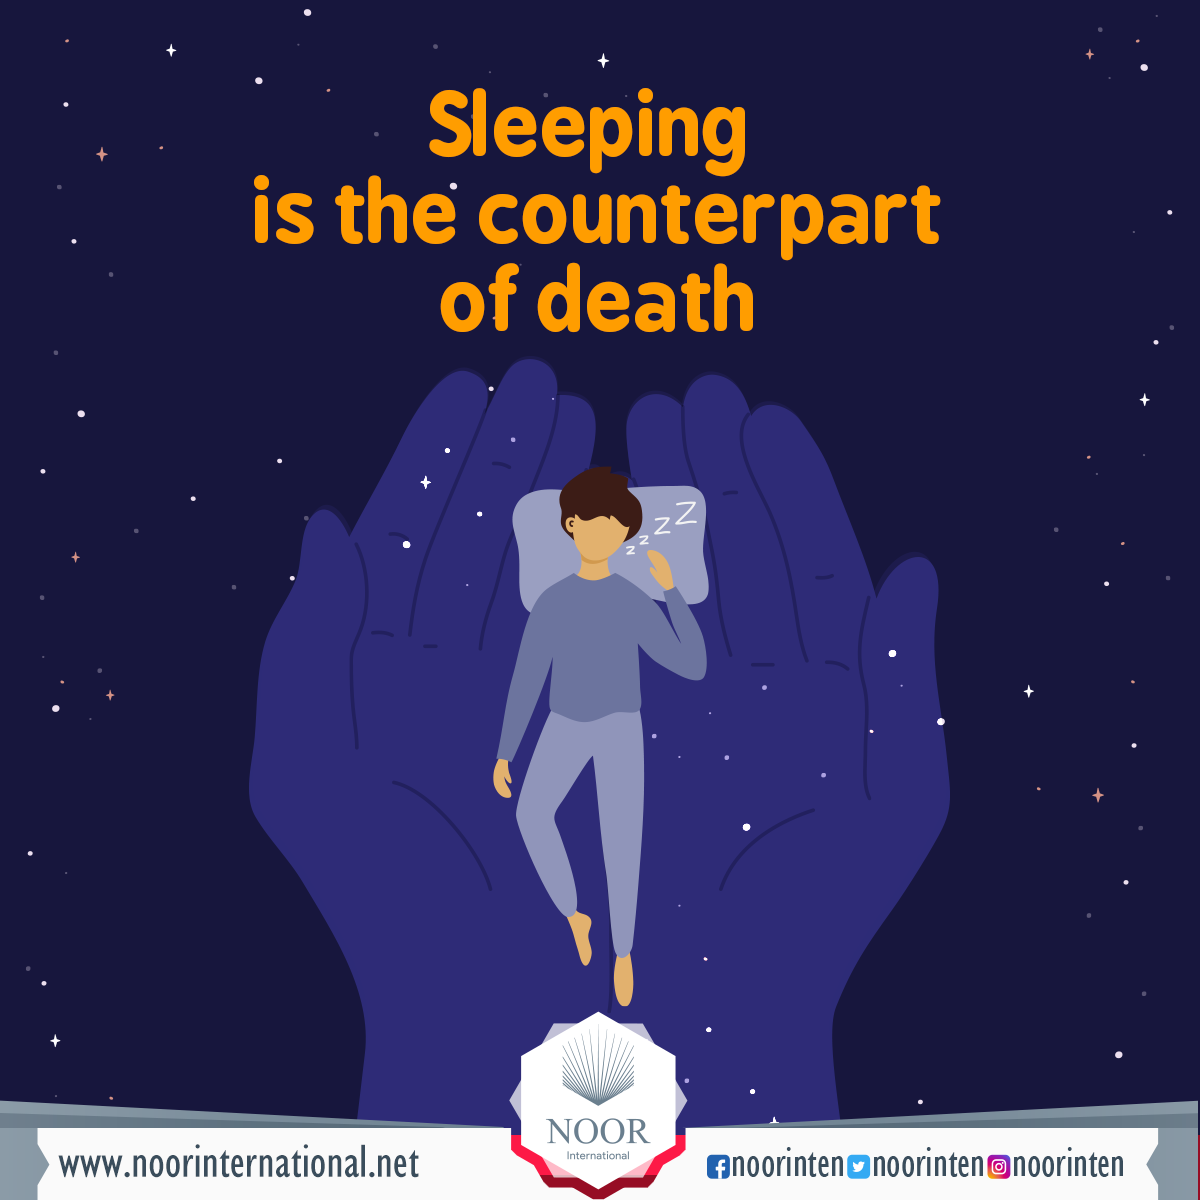 Sleeping is the counterpart of death